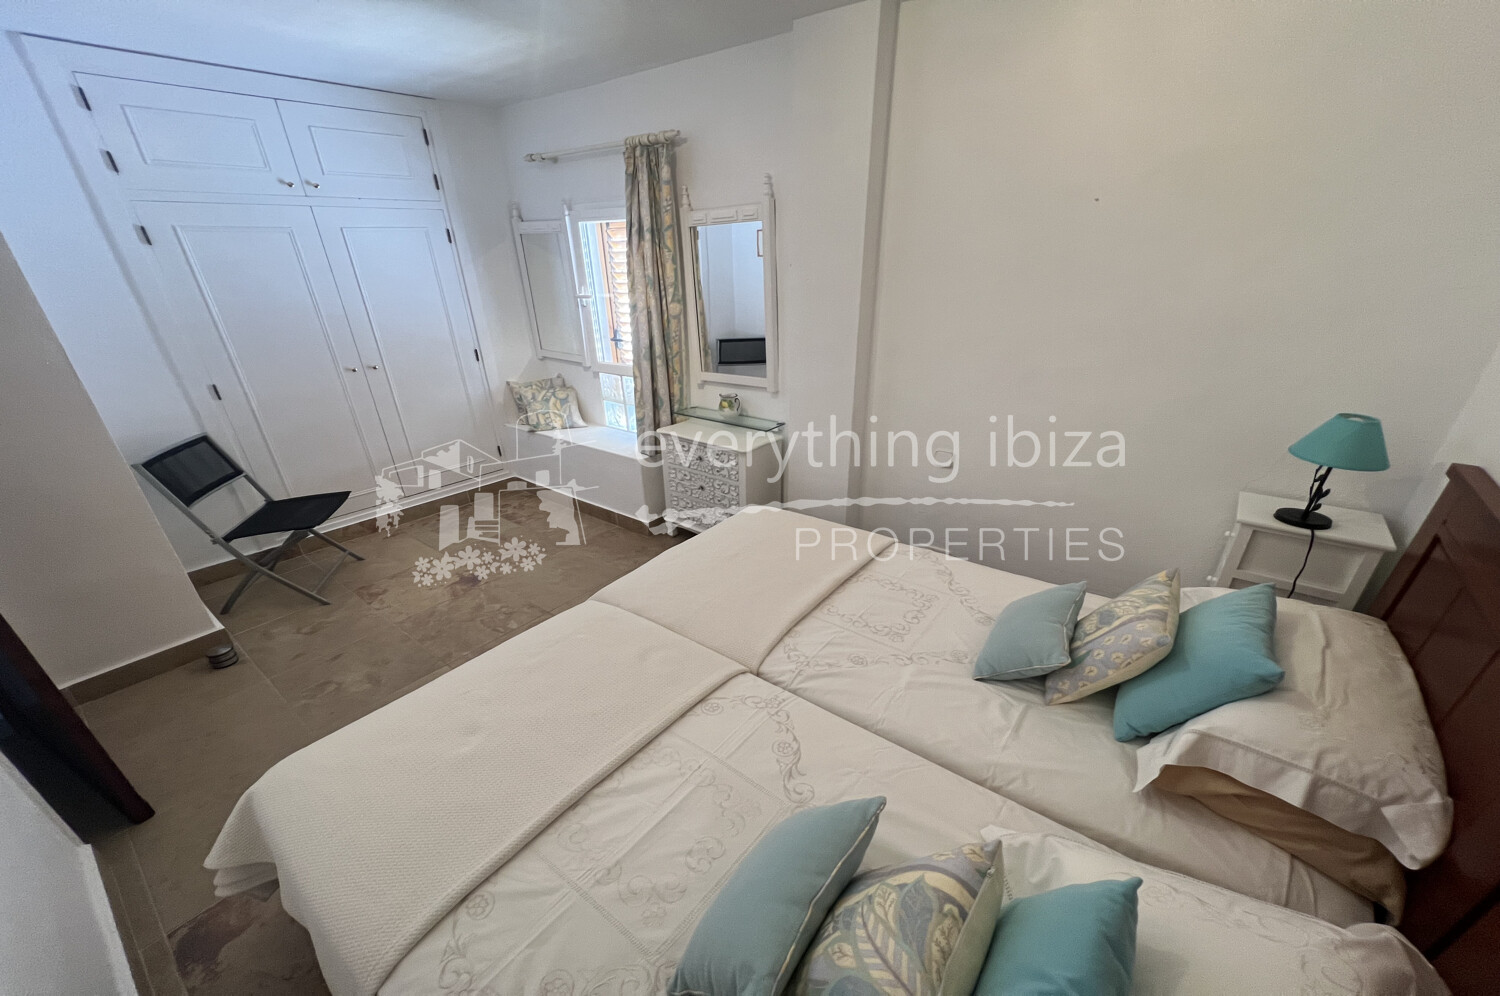 Contemporary Modern 2 Bed Apartment with Super Sea, Bay & Sunset Views, ref. 1705, for sale in Ibiza by everything ibiza Properties